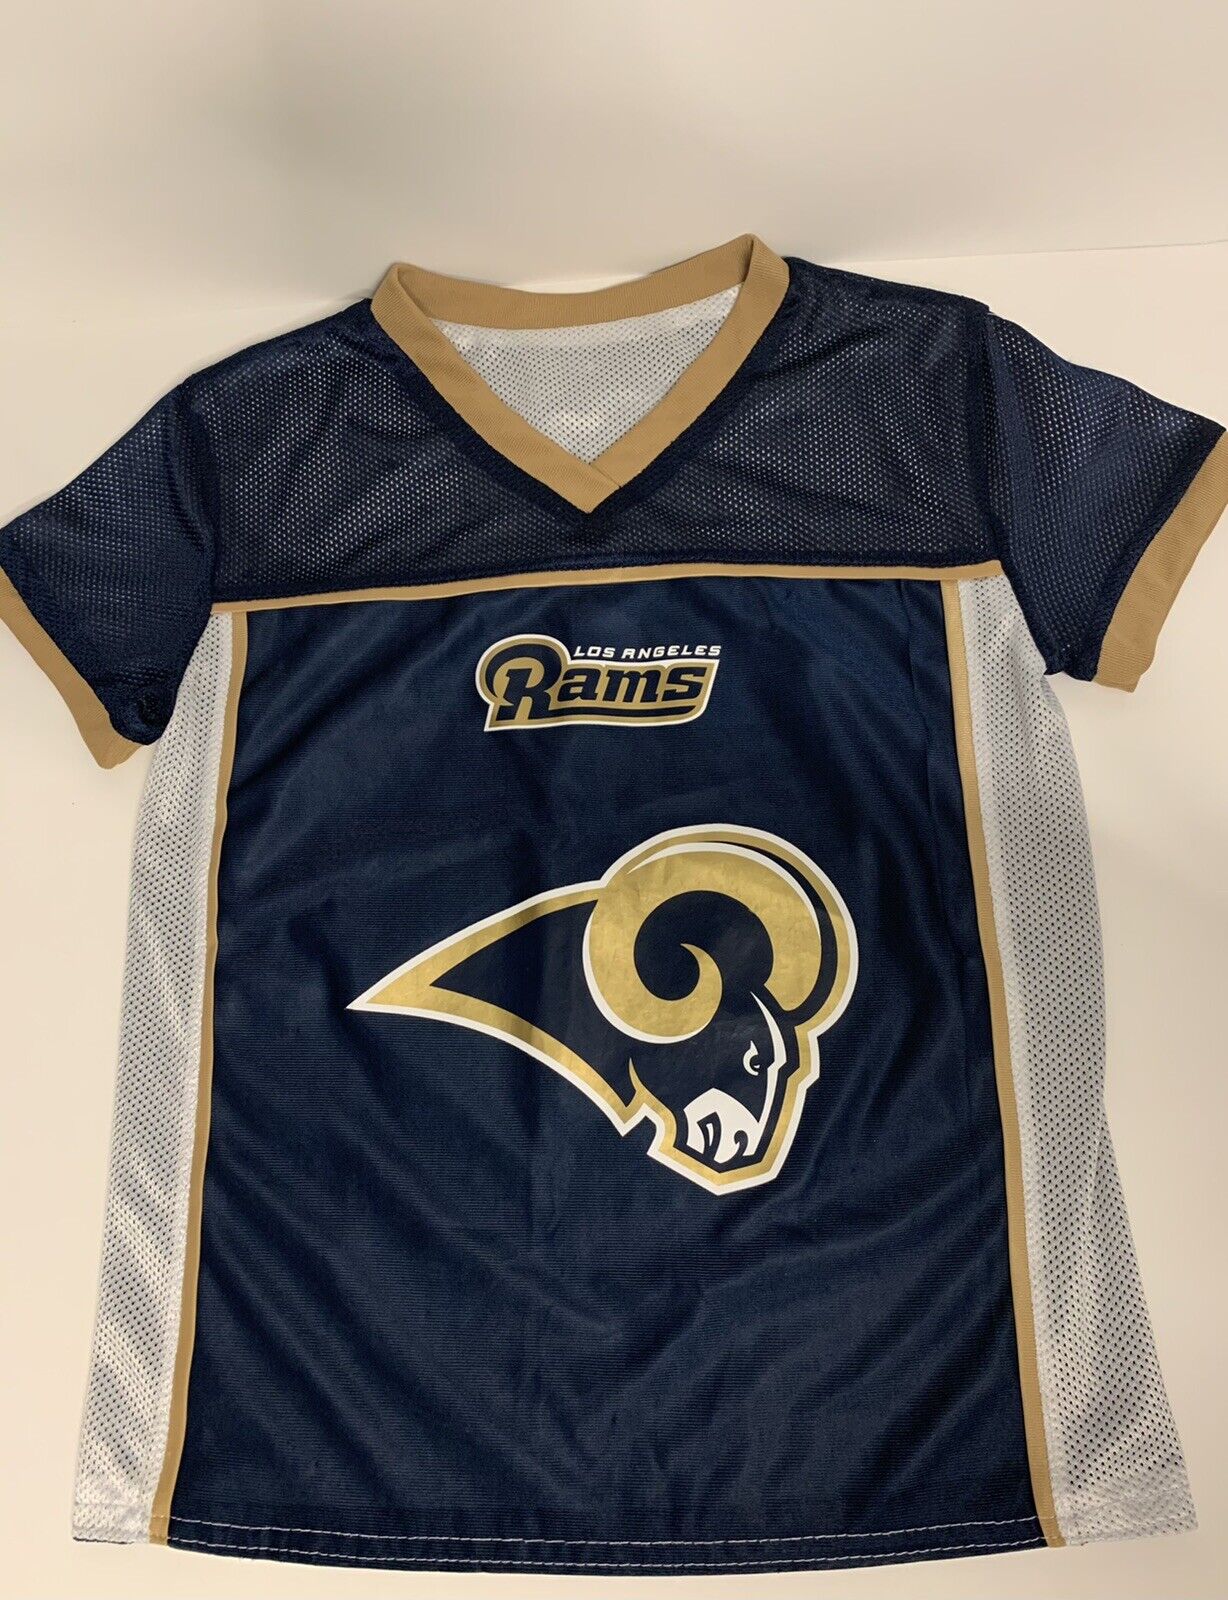 Rams Jersey Youth Medium/Large Navy&White Reversible NFL Flag Football Play 60